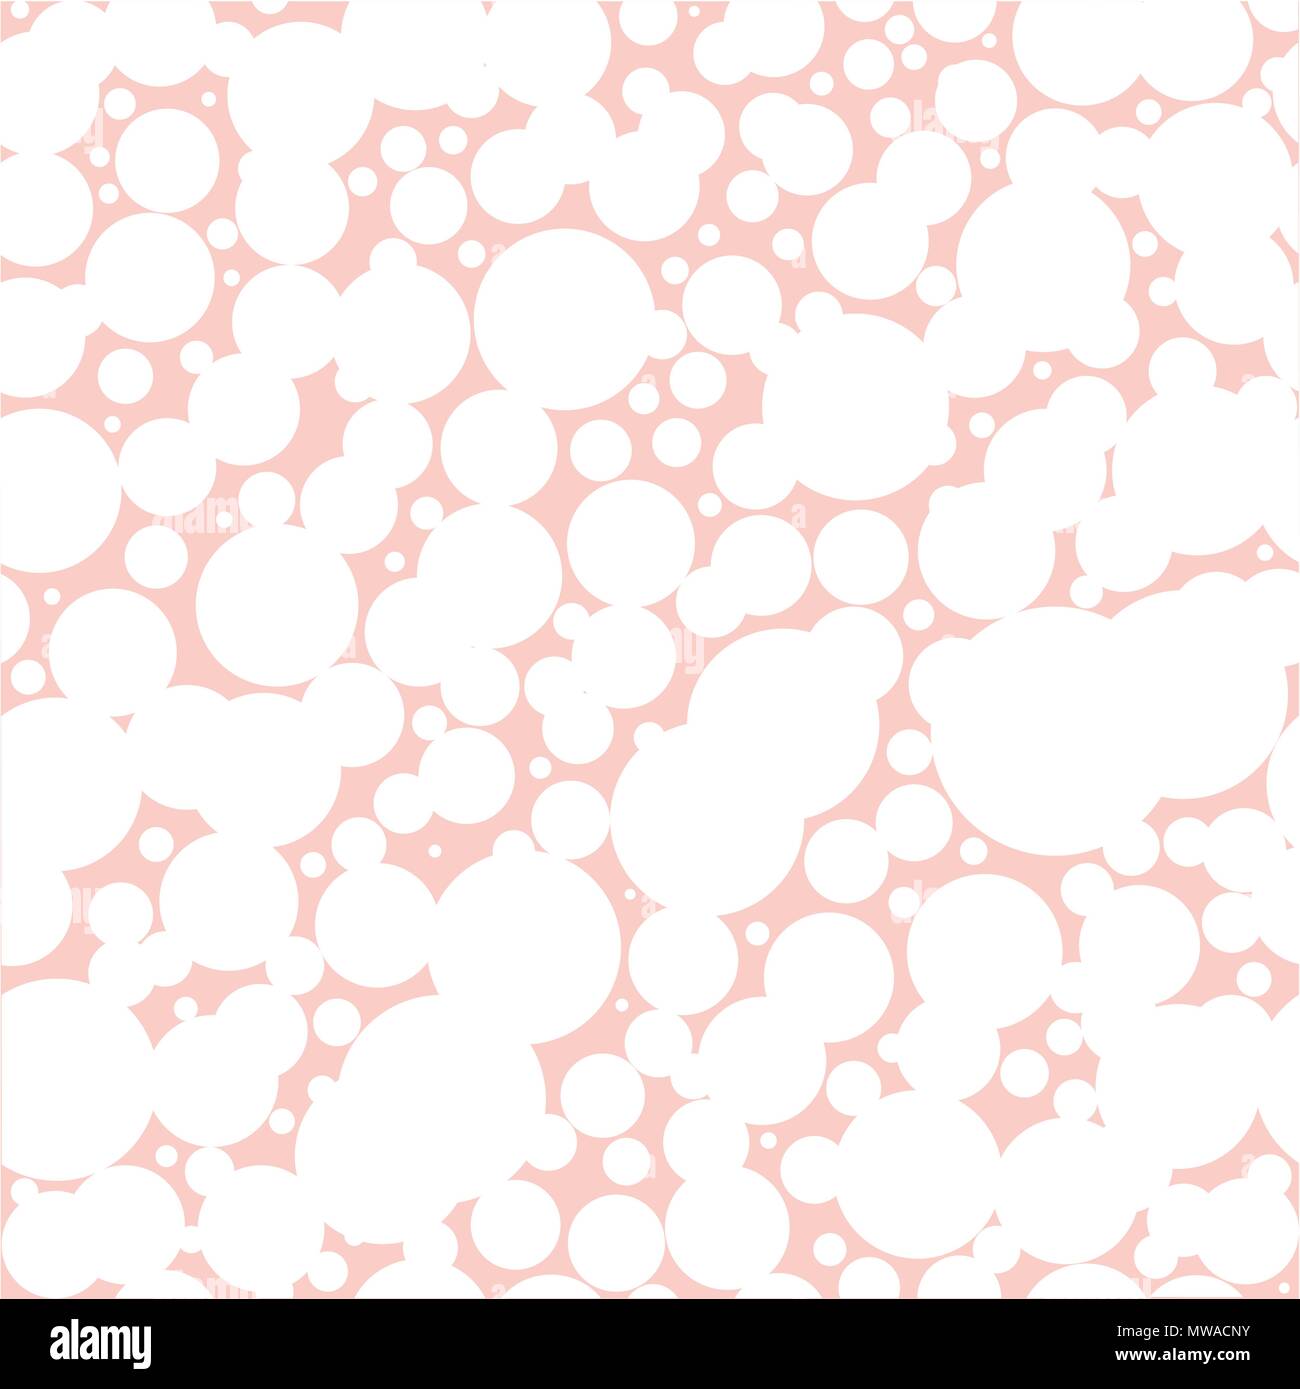 A seamless pattern of qhite circles over a pink background Stock Vector